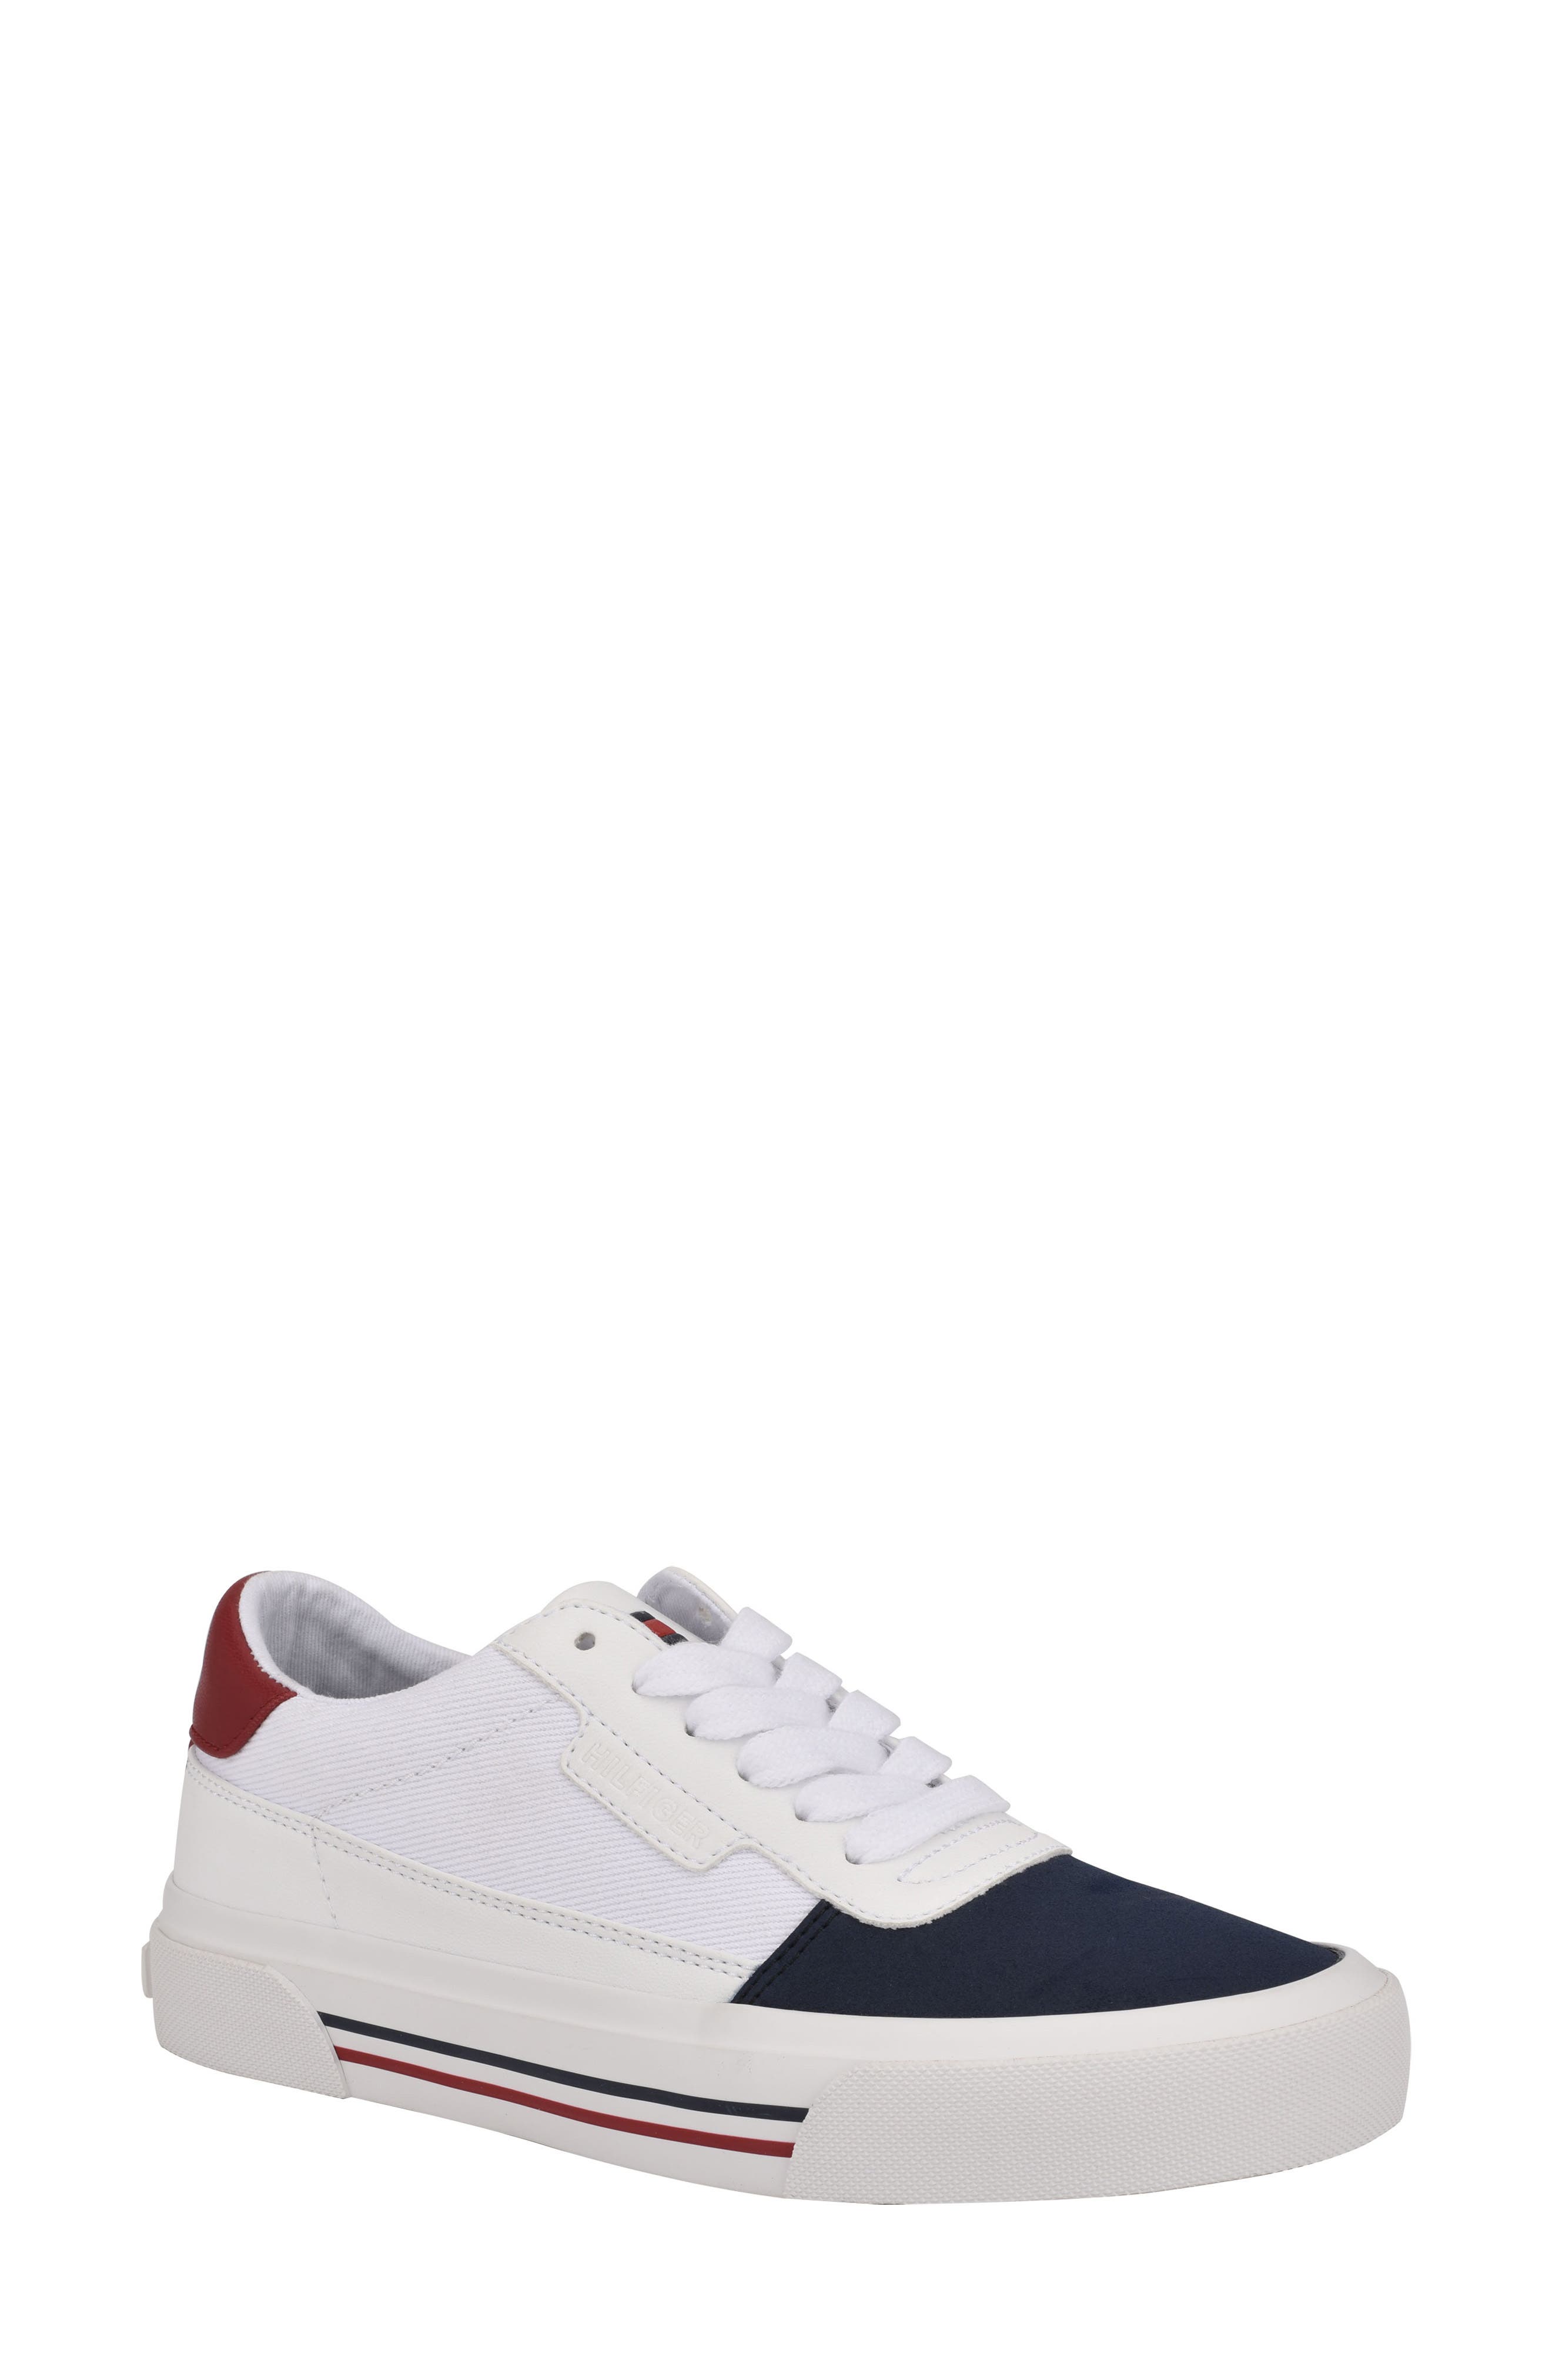 tommy hilfiger shoes cheap